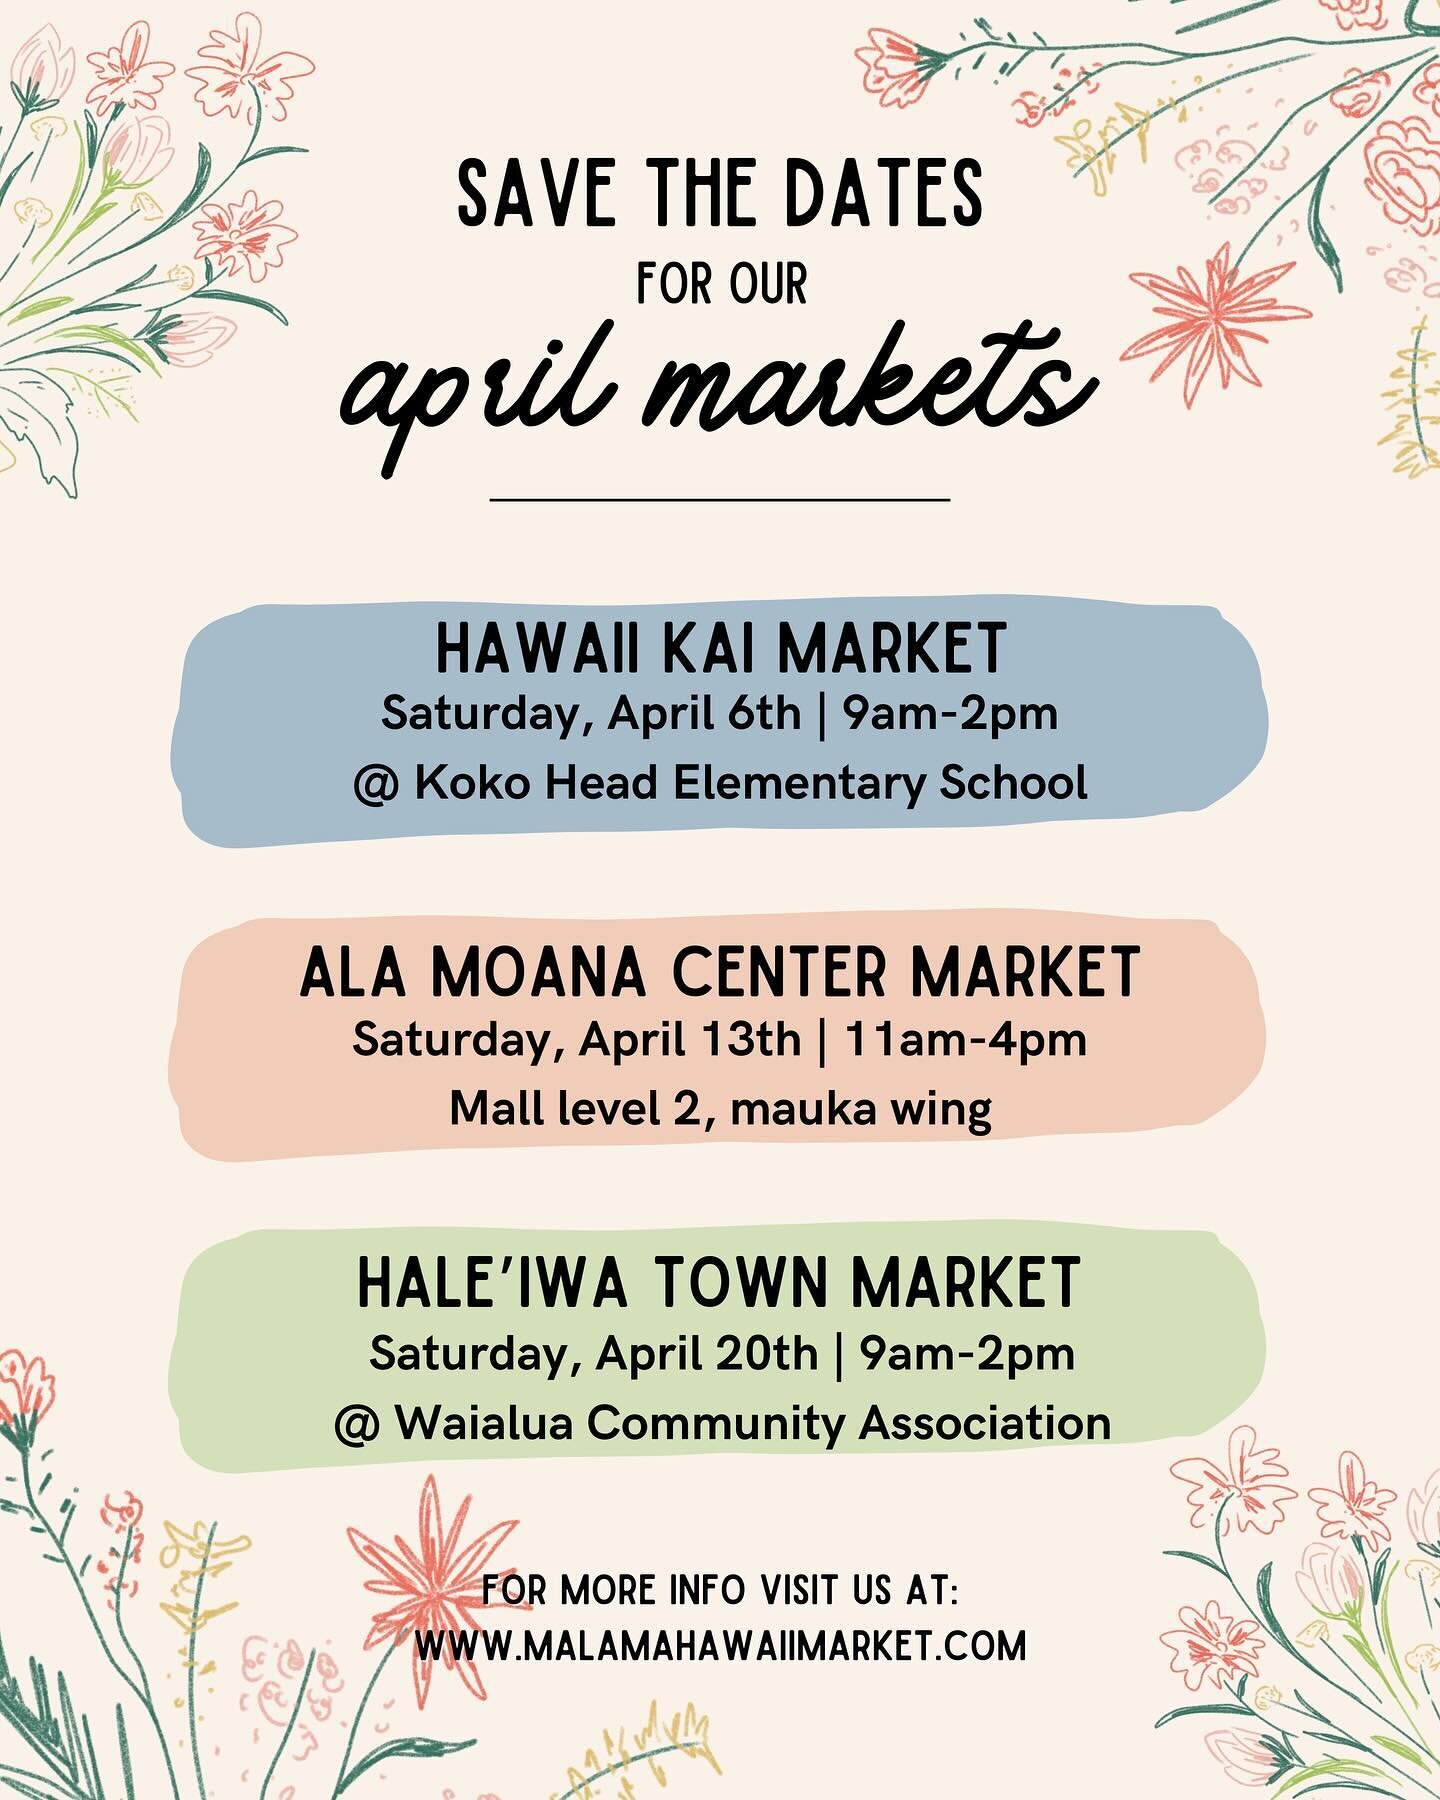 SPRING HAS SPRUNG 🌷🌻🌹🪻

Save the dates for our 〰️APRIL MARKETS〰️ in Hawai&lsquo;i Kai, Ala Moana Center, &amp; Hale&lsquo;iwa Town! 🗓️

Join us as we gather with over 130+ artists and makers from across Hawai&lsquo;i all month long! Each market 